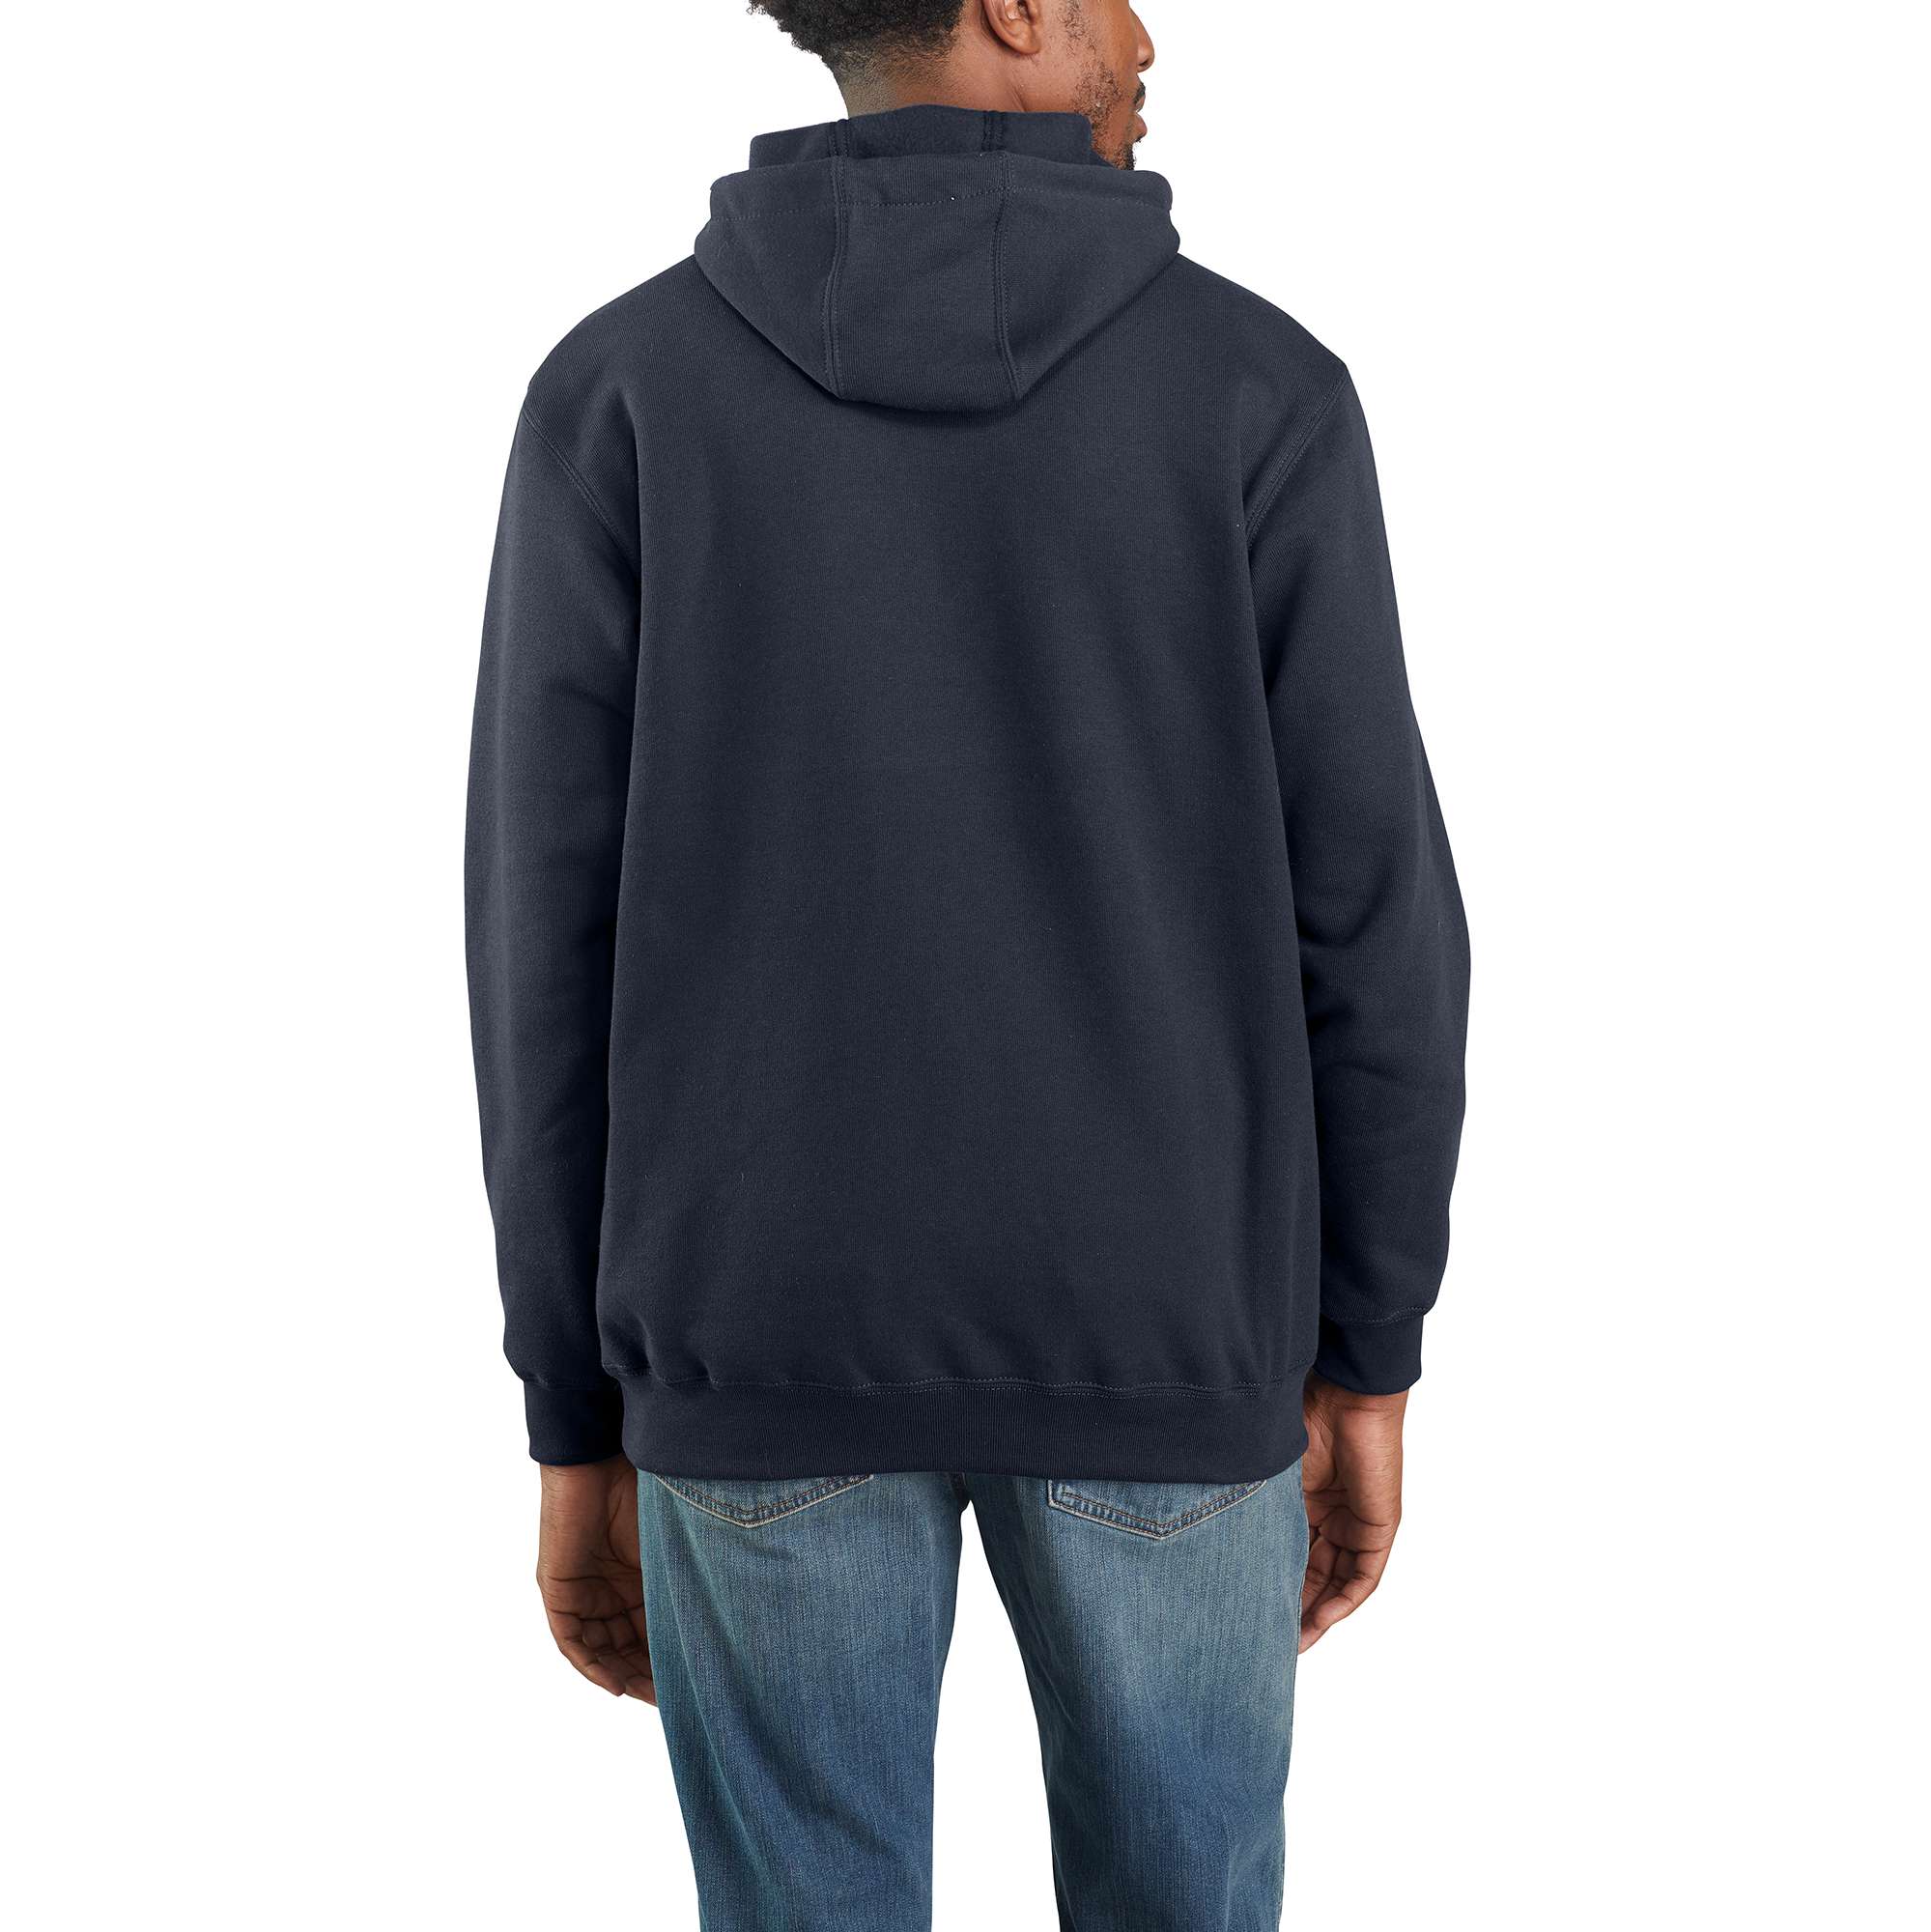 Carhartt Men's Knit Long Sleeve Graphic Hoodie (X-large) at Lowes.com